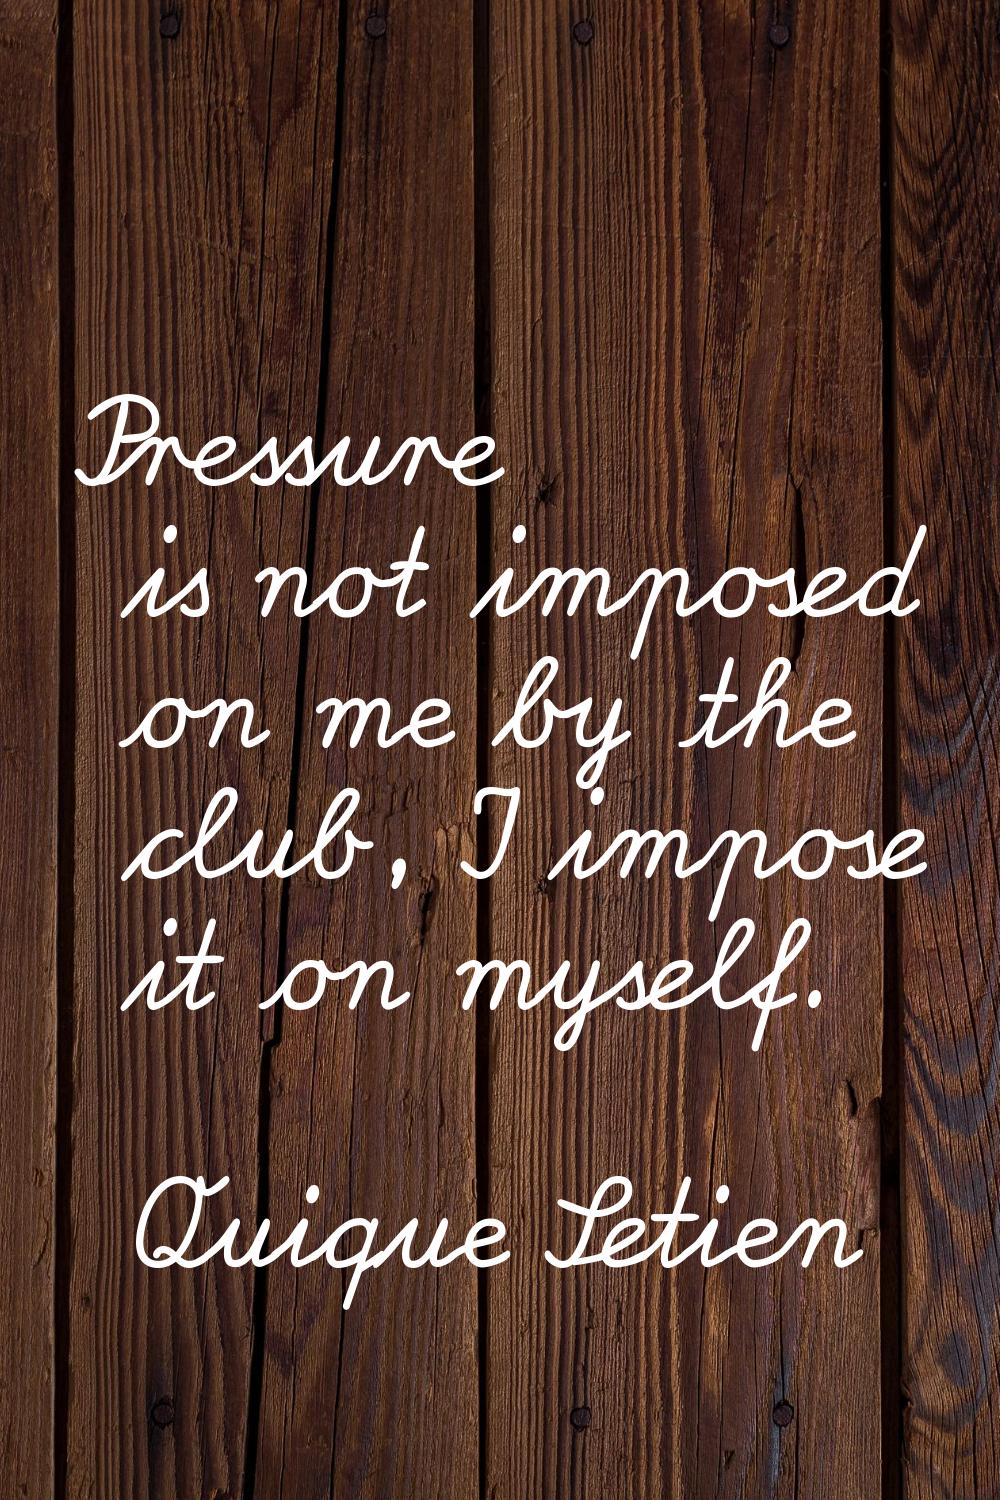 Pressure is not imposed on me by the club, I impose it on myself.